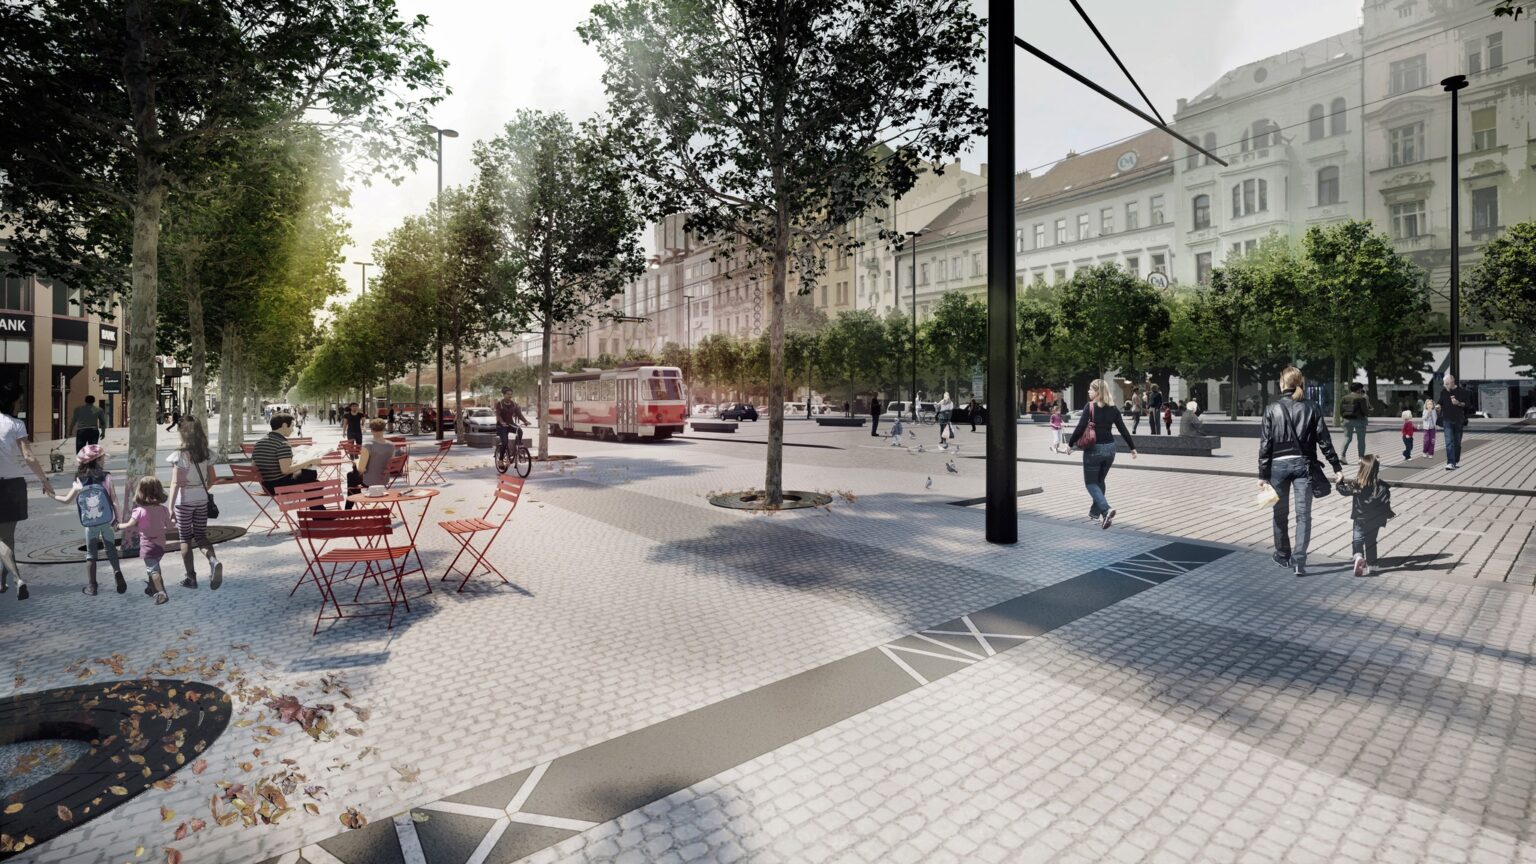 The cycle lane will run between two rows of trees and at the level of the sidewalk. Zdroj: IPR